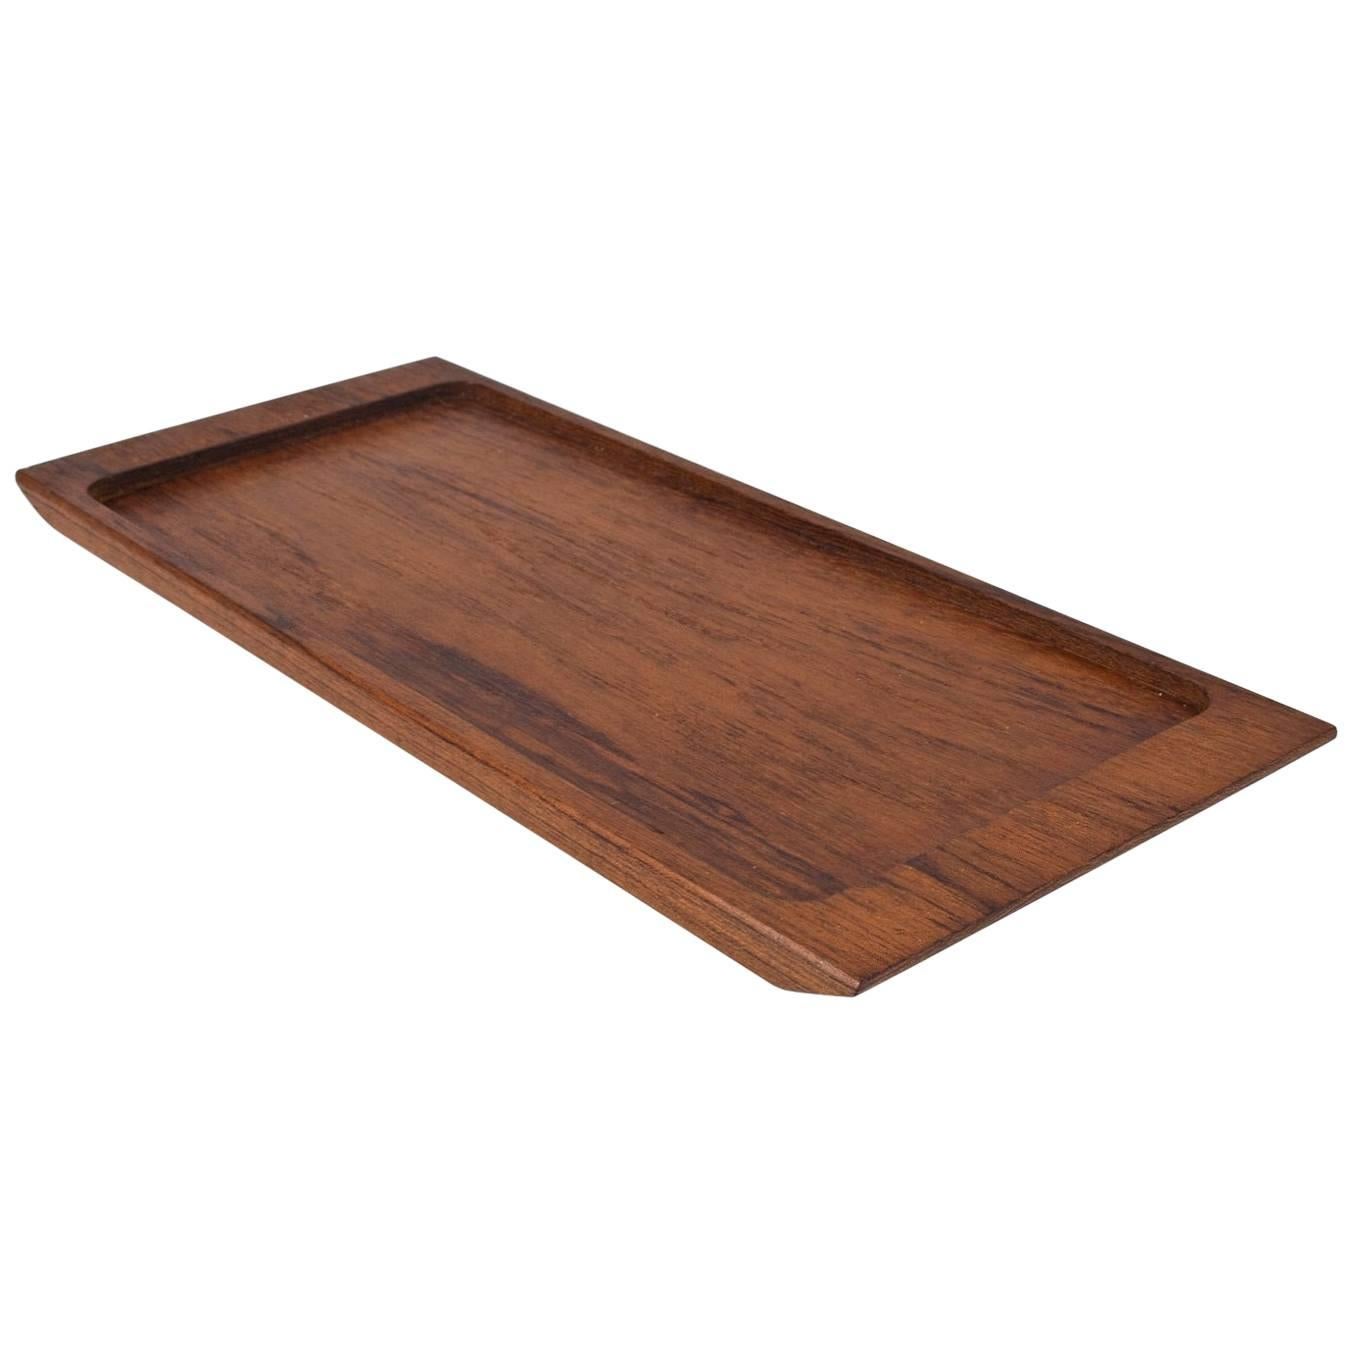 1960s Midcentury Danish Solid Wooden Teak Desk Accessory or Table Tray For Sale